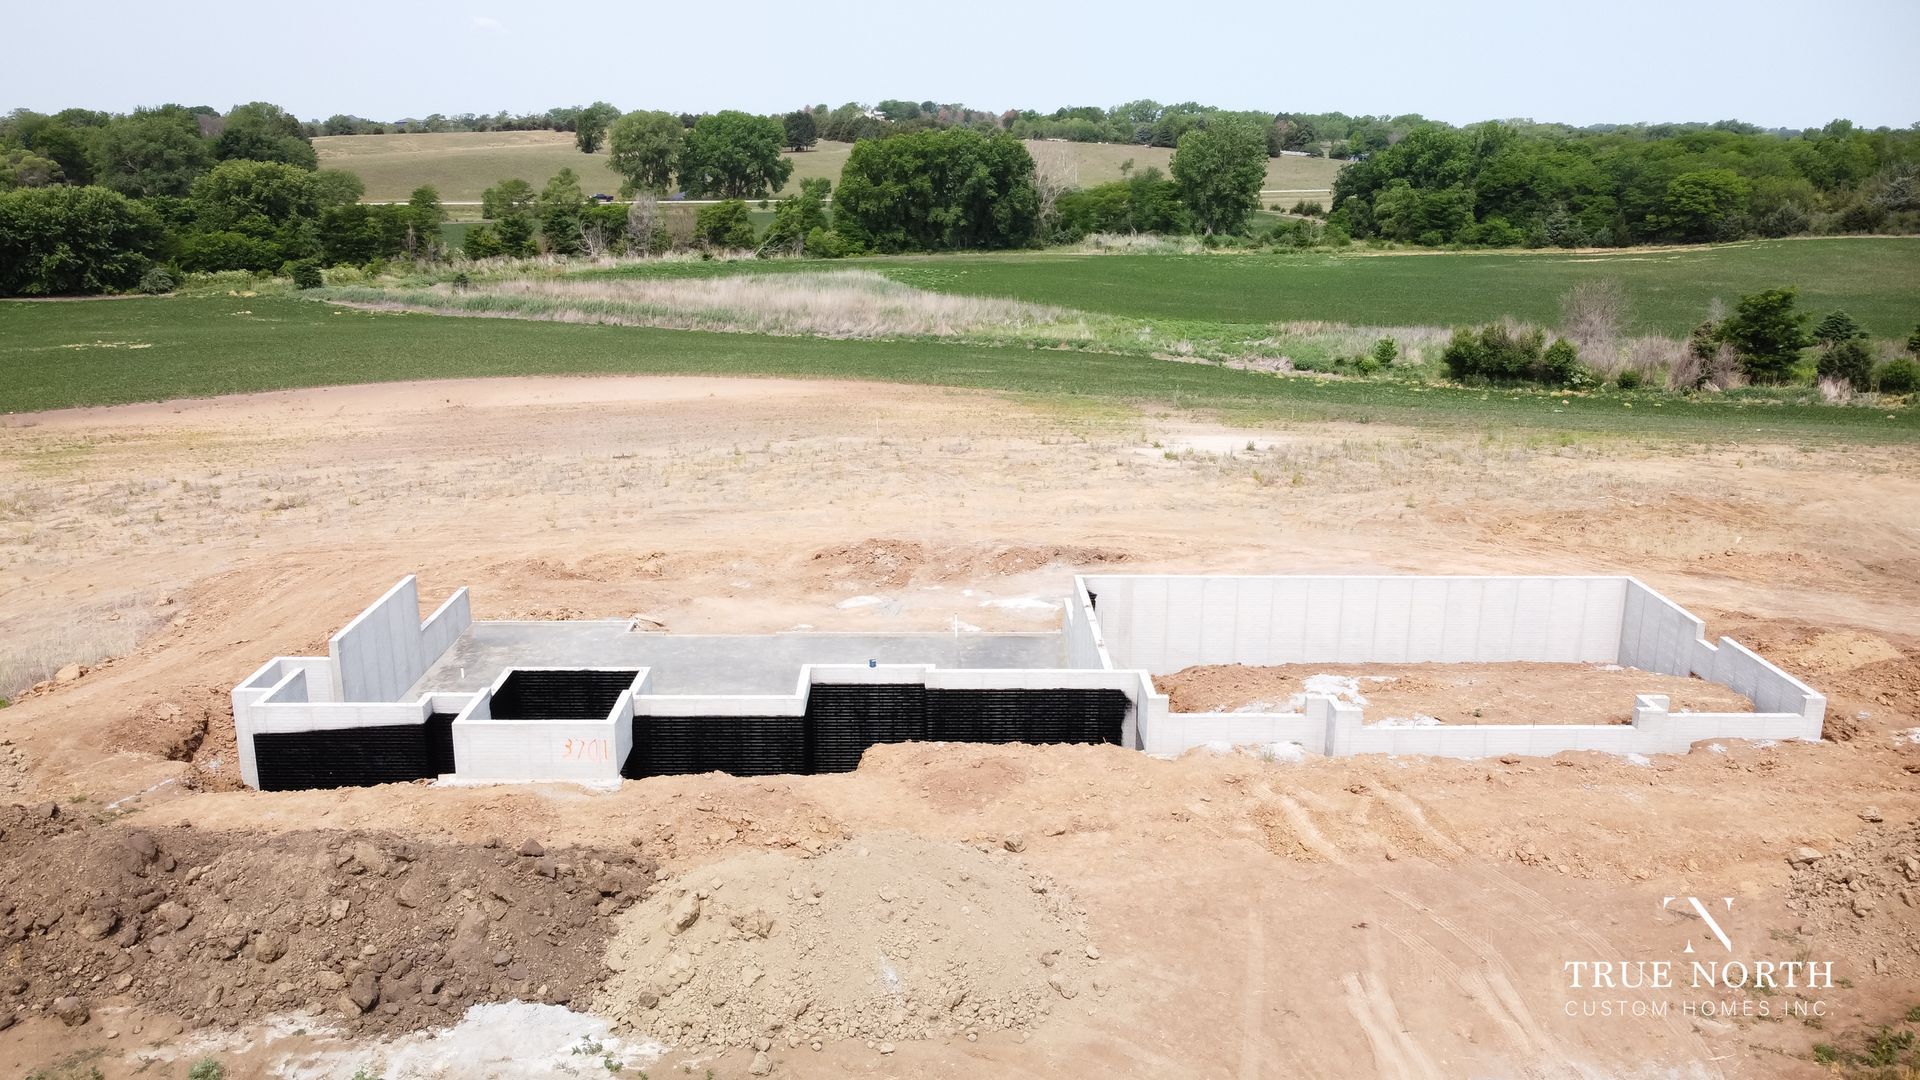 Find the perfect location to build with True North Custom Homes in Lincoln, Nebraska.